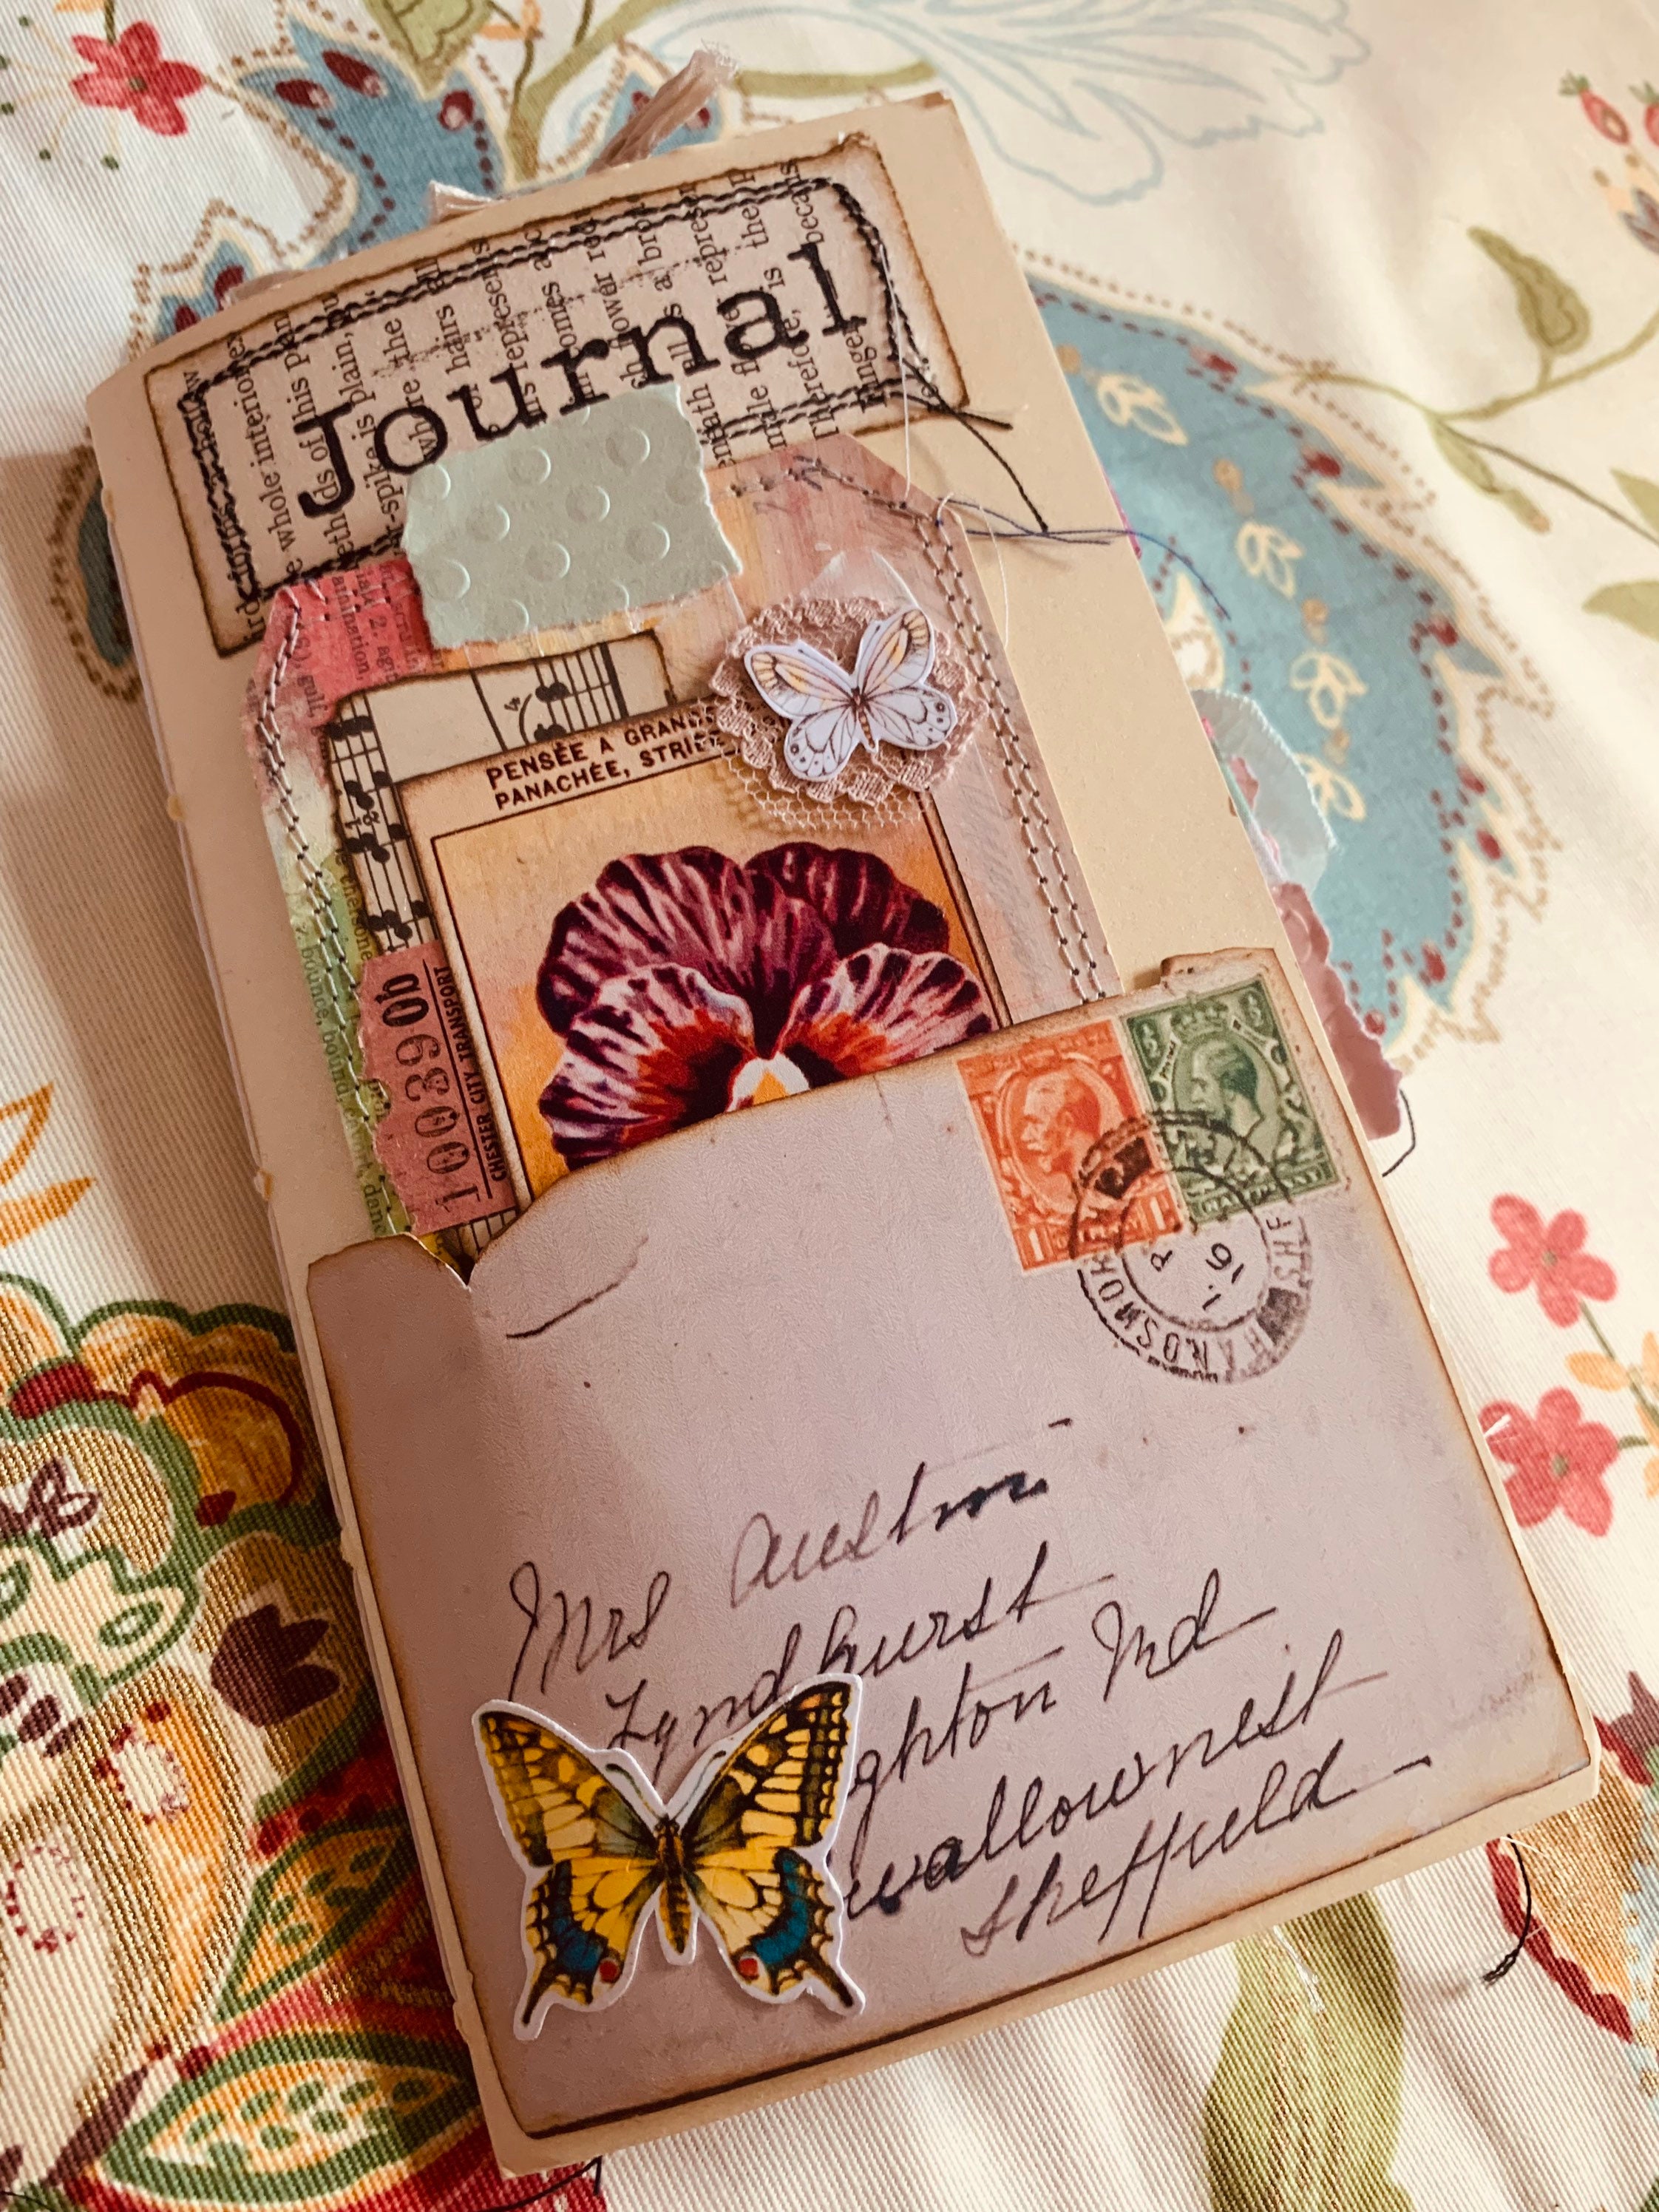 Embroidery Journal Kits, Deluxe Thread Journal Kit, Stitch Journal